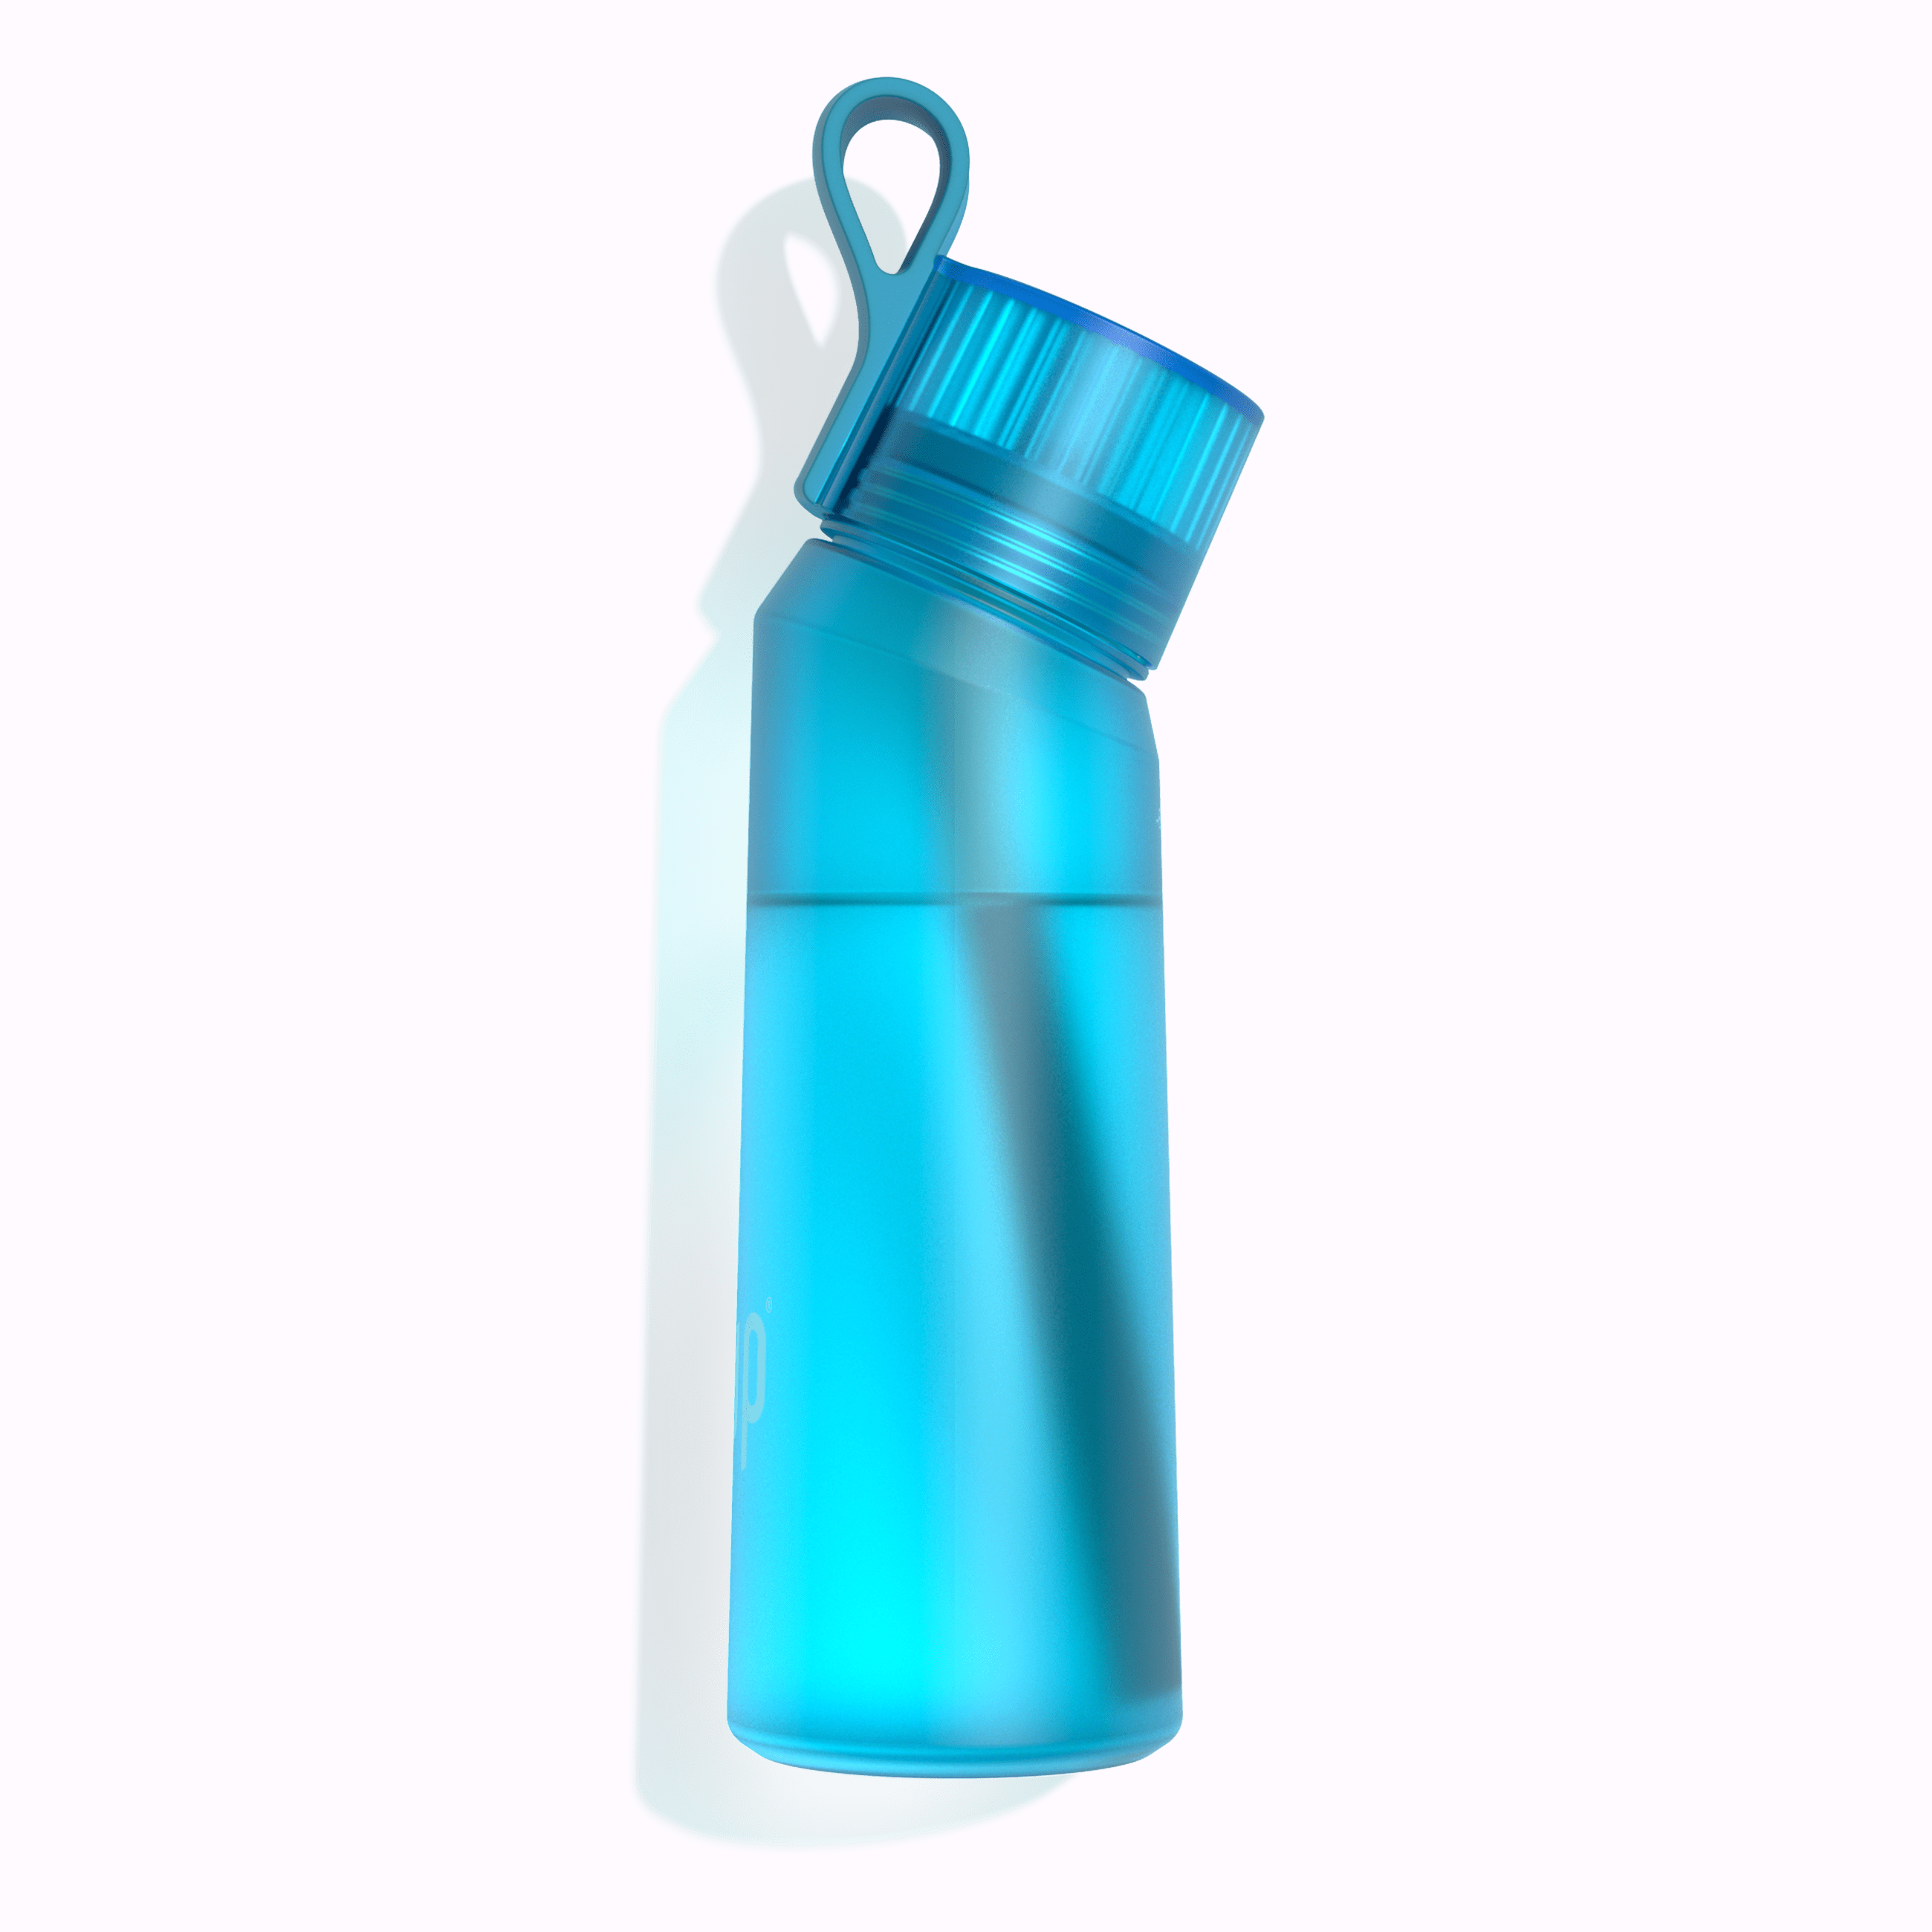 Shop Generic Air Up Water Bottle with Flavor Pods,Tritan